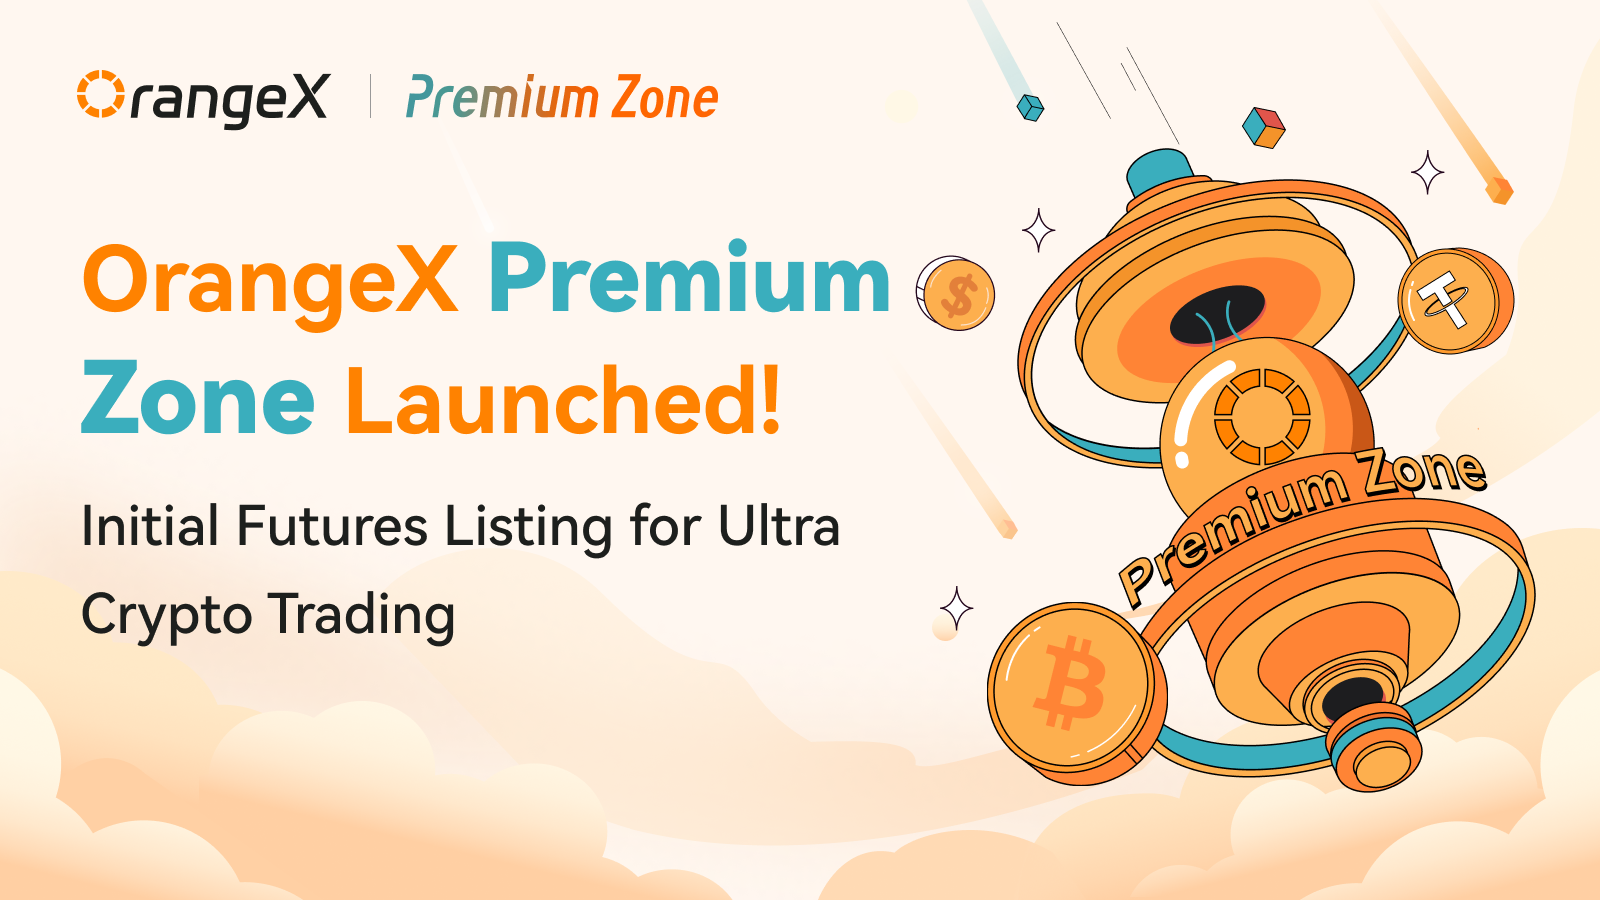 Announcing OrangeX Premium Zone! Your Gateway to Ultimate Crypto Trading